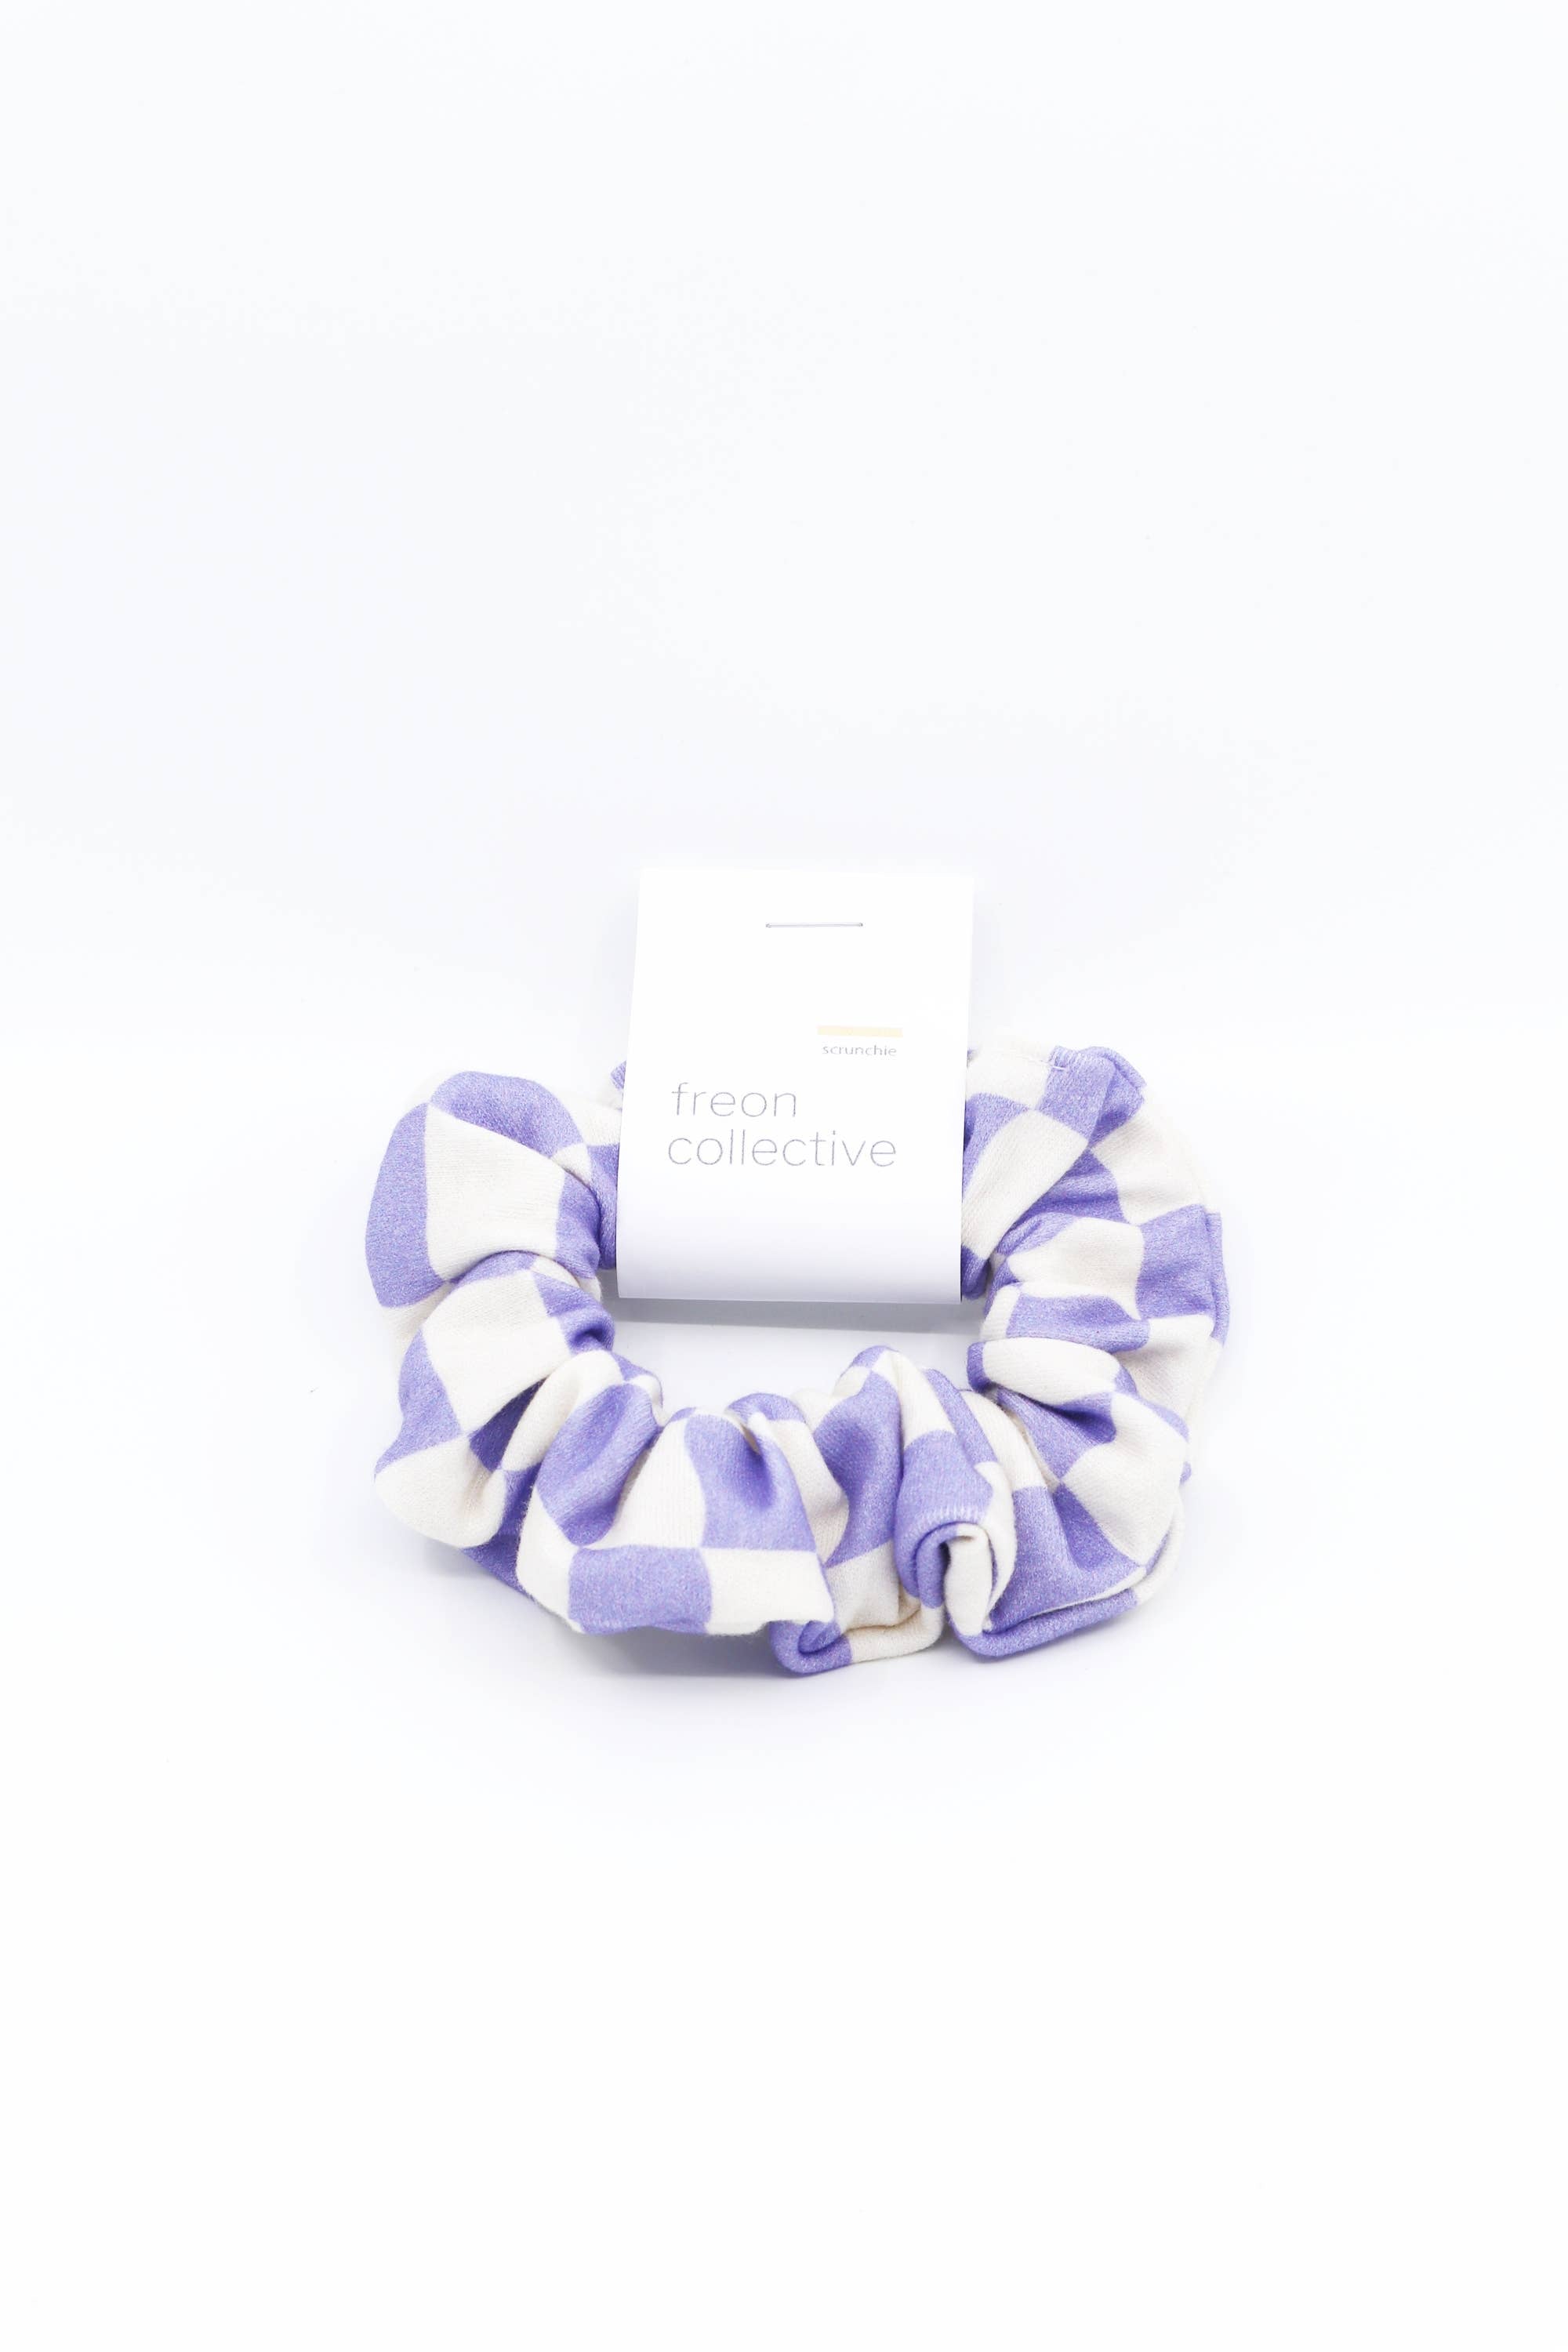 Freon Collective - Organic Cotton Hair Scrunchie - Periwinkle Checker